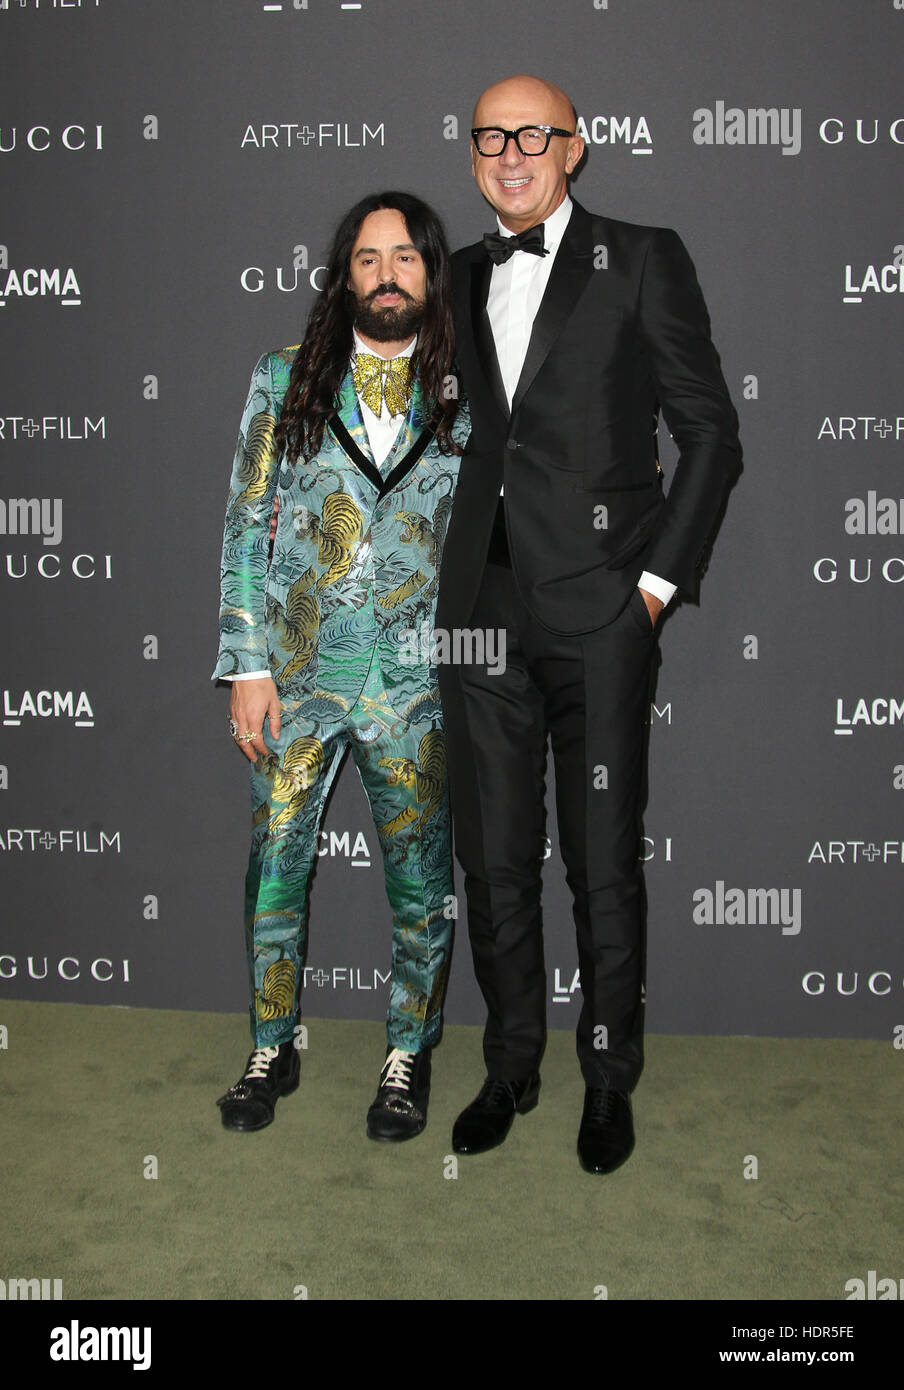 Alessandro Michele and Marco Bizzarri attending the LACMA Art + Film Gala honoring Robert Irwin and Kathryn Bigelow presented by Gucci at LACMA in Los Angeles, California. Featuring: Marco Bizzarri,